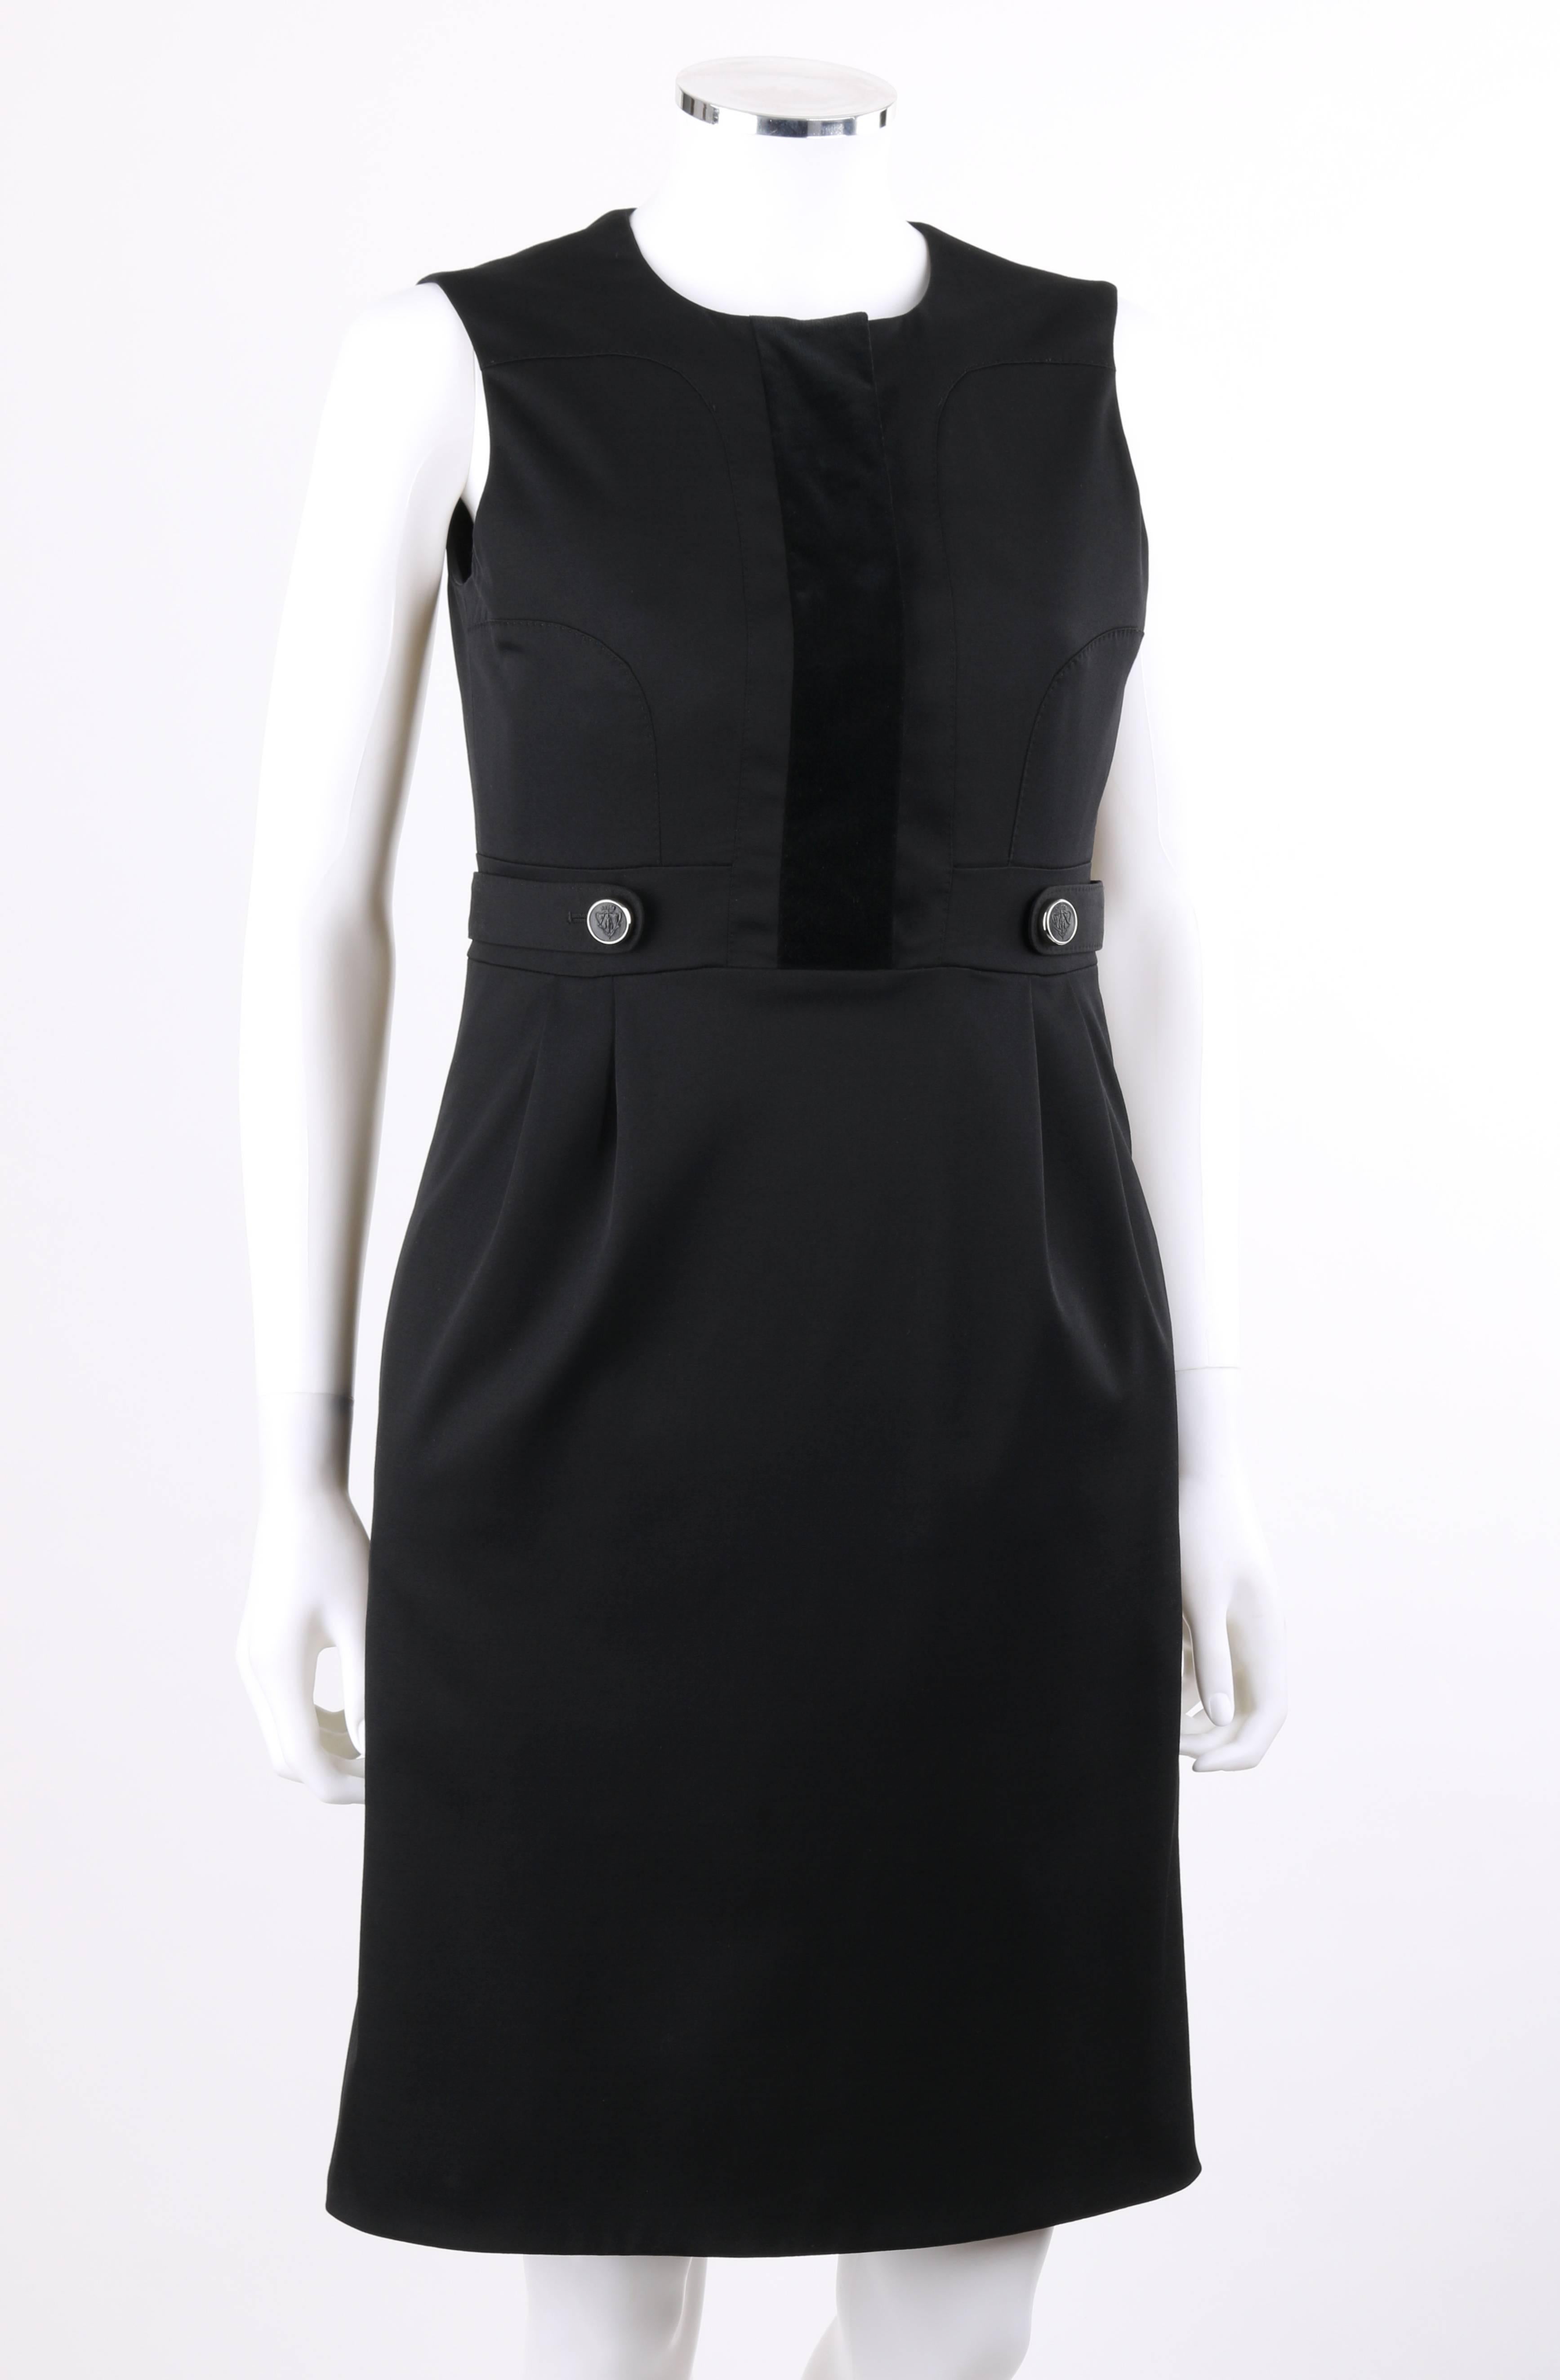 Gucci Autumn/Winter 2007 black wool cotton sleeveless cocktail dress; New with tags. Scoop neckline. Center front velvet panel with eight hidden hook and eye closures. Princess seams. Banded waist with button and tab detail. Four front knife pleats